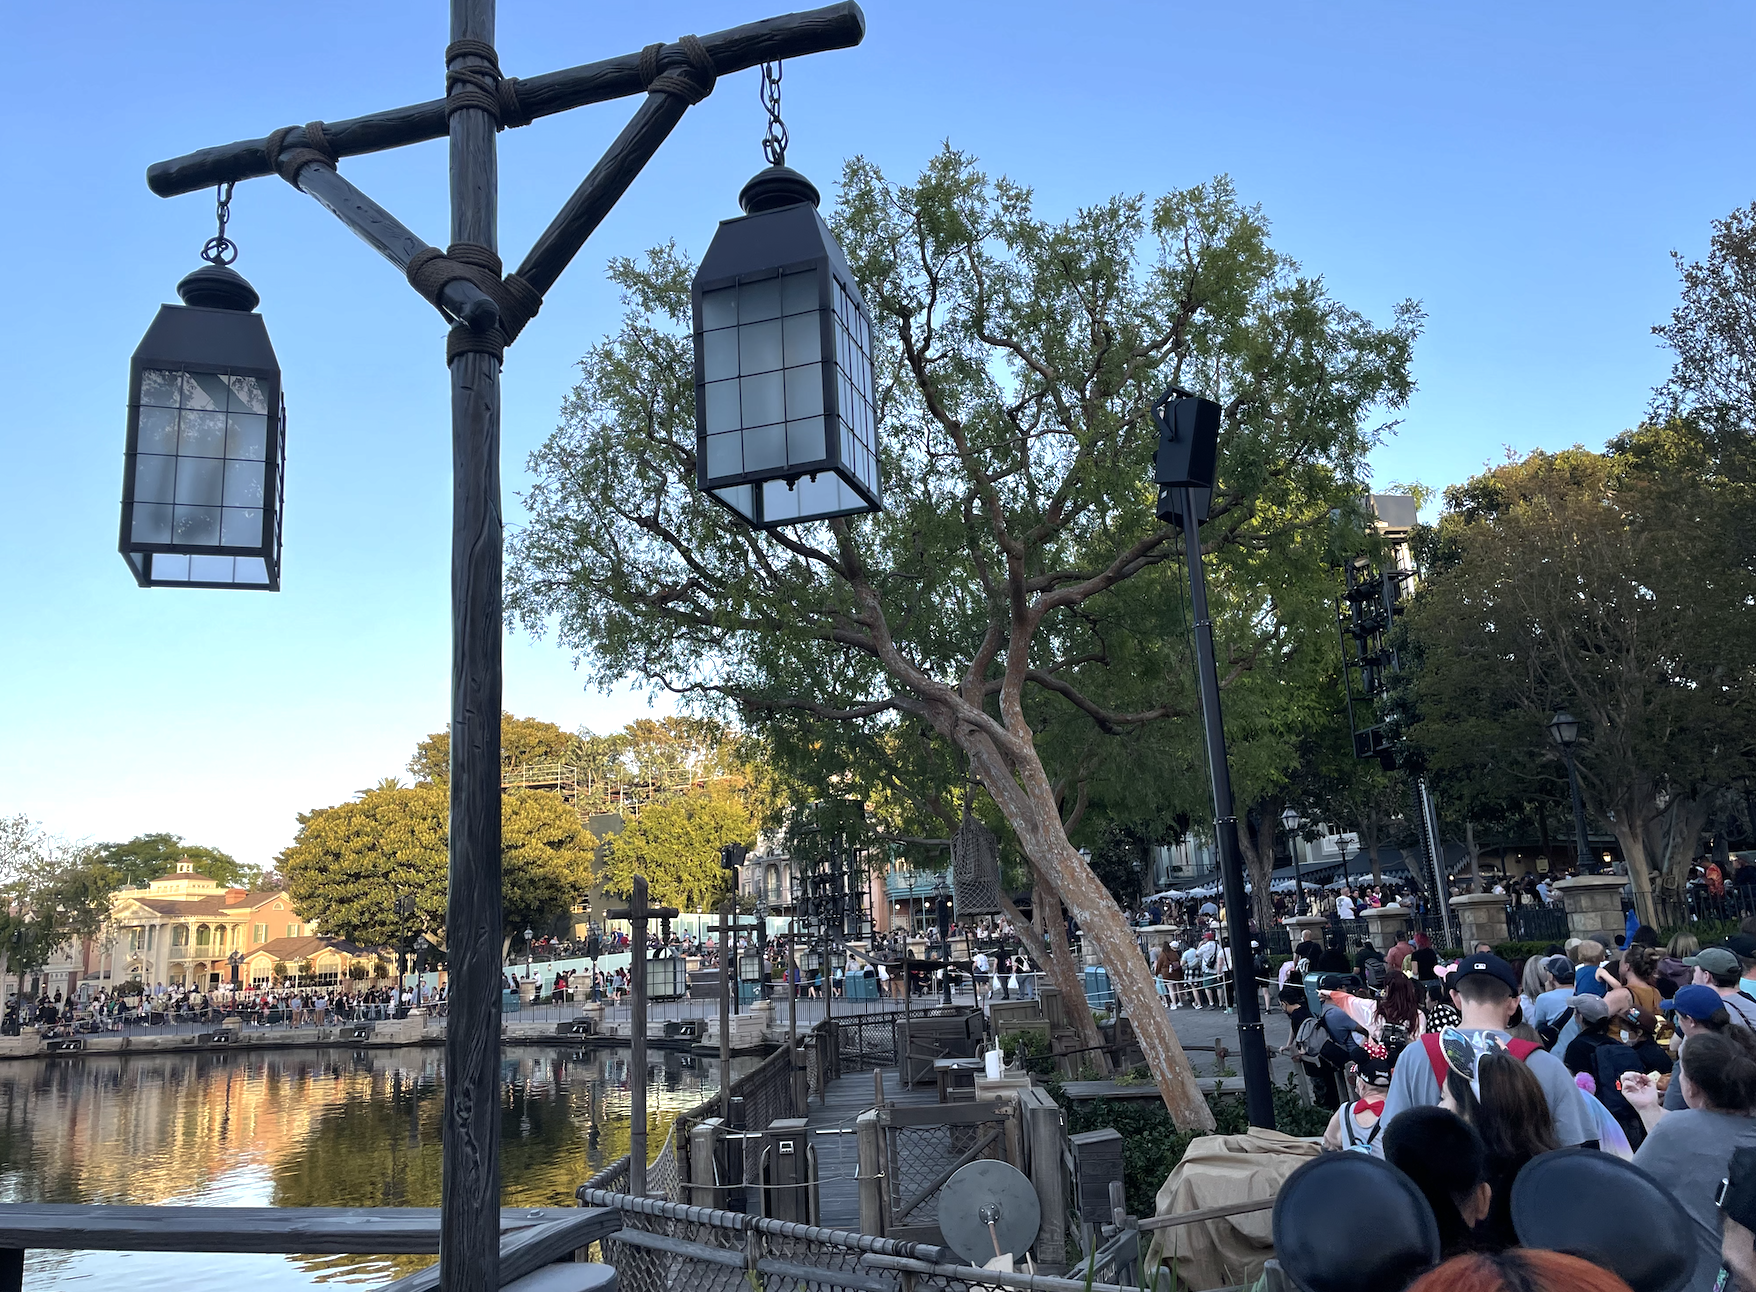 Hungry Bear Fantasmic! dining package review